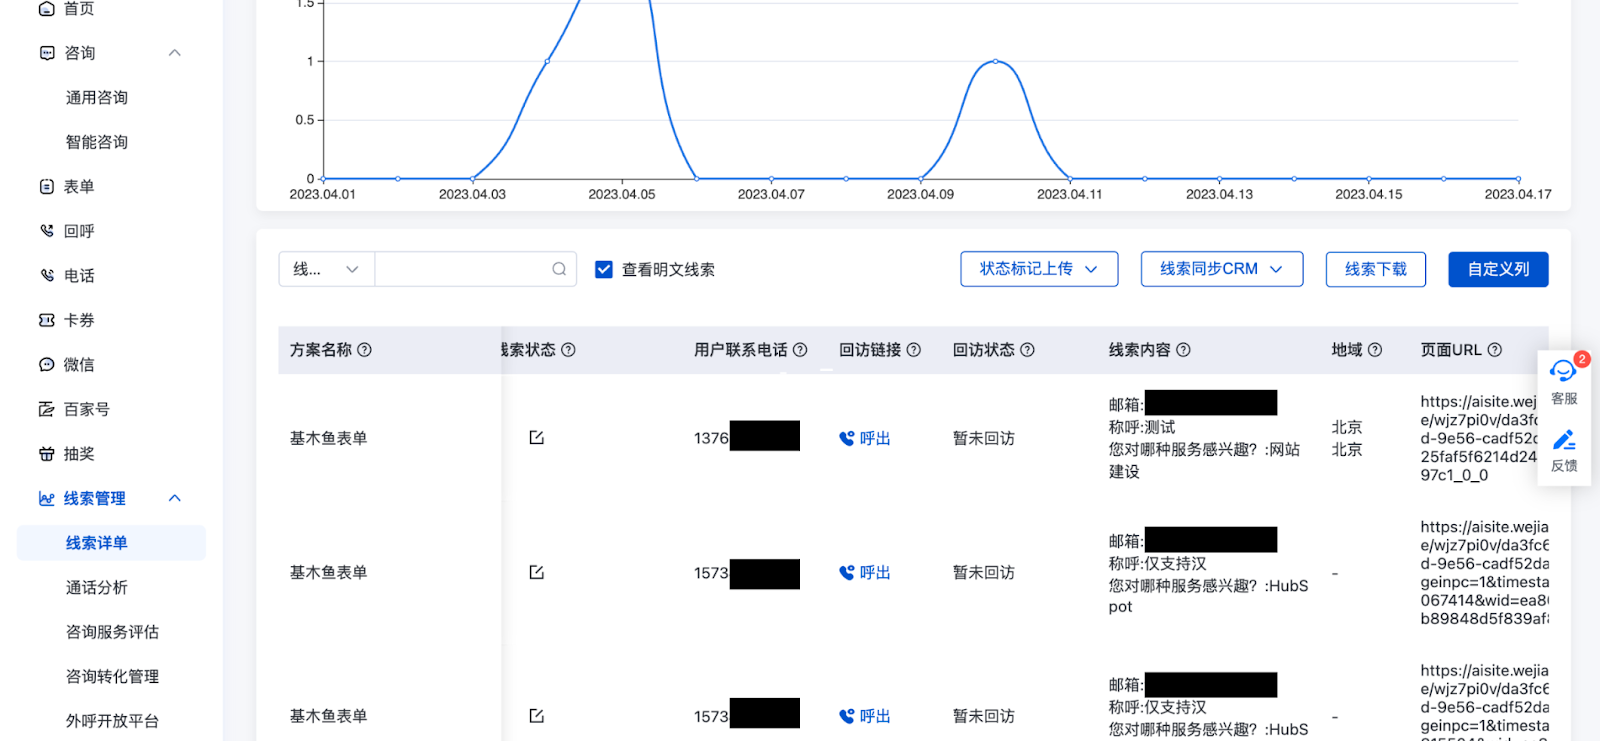 Data collected in Baidu CRM system